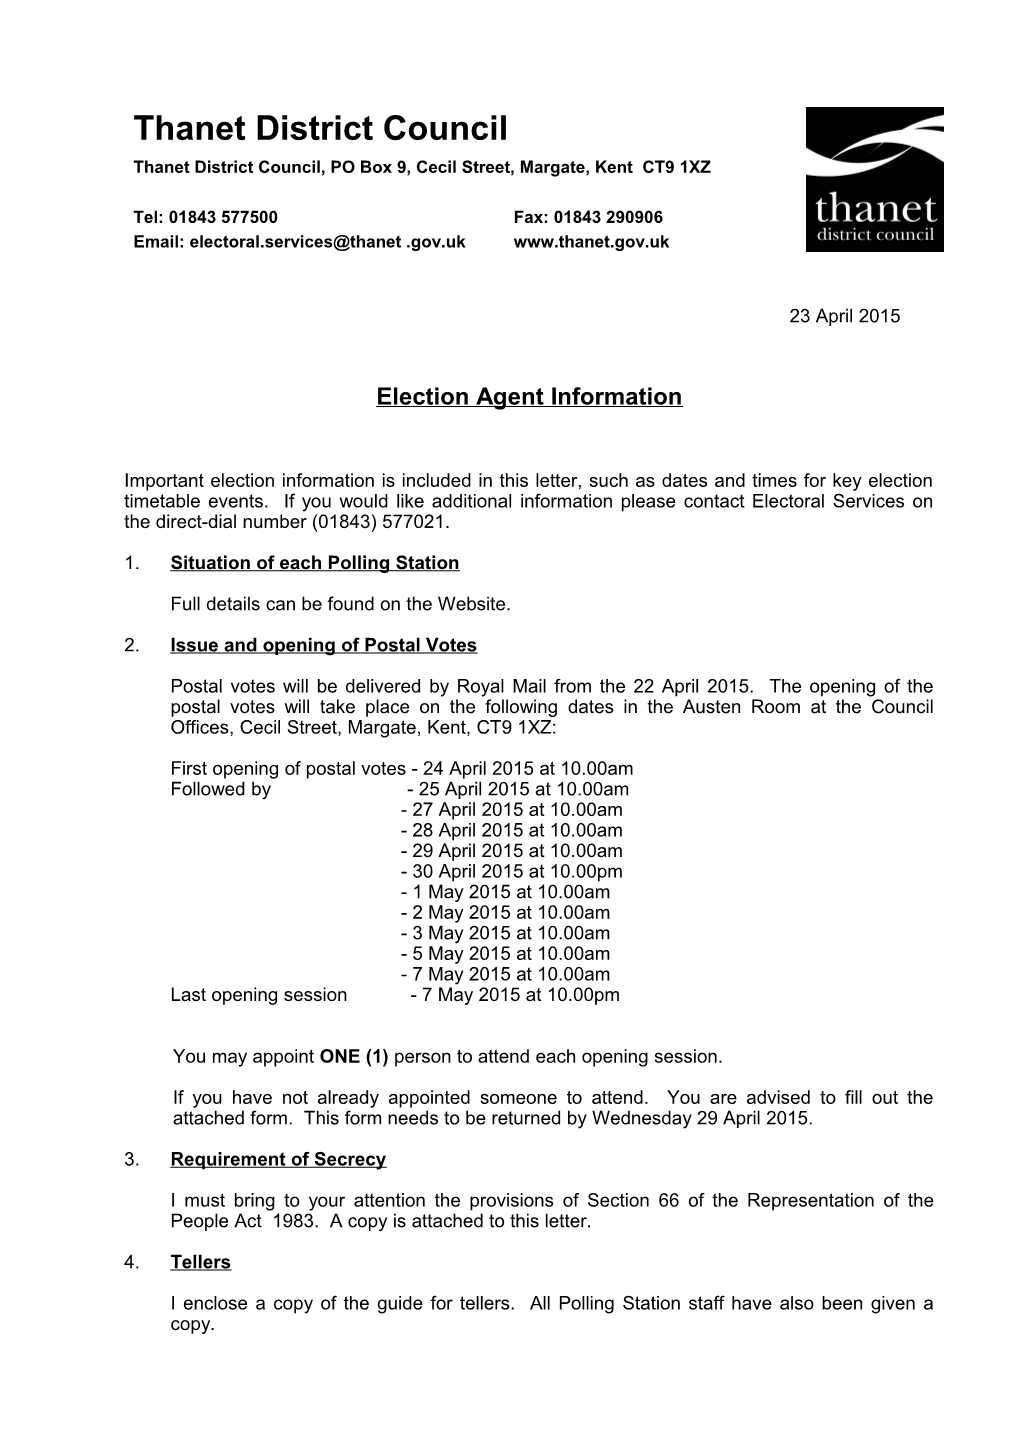 Election Agent Information Letter and Candidate(S) Forms